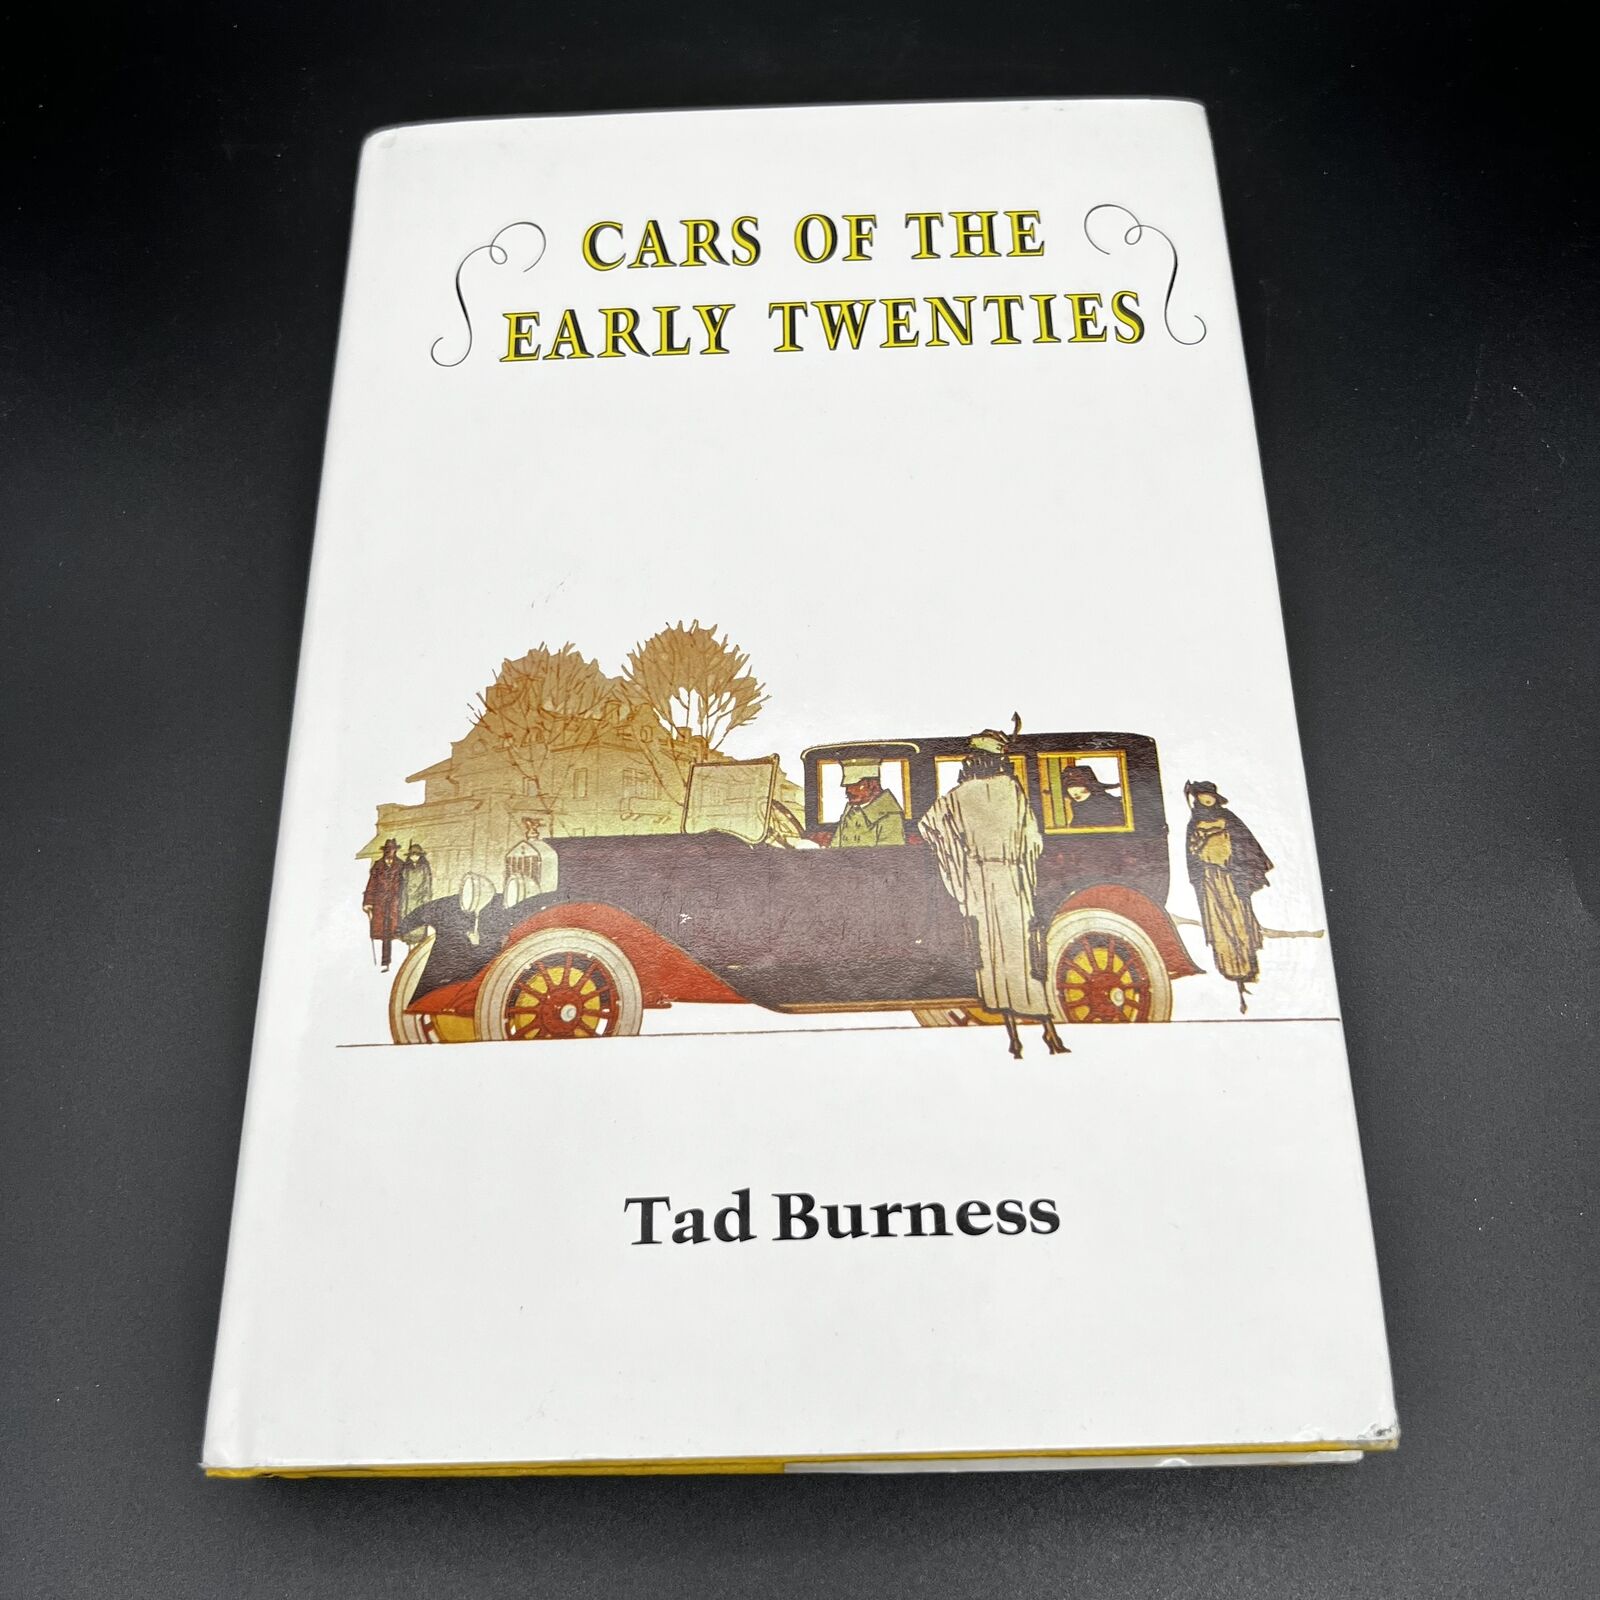 CARS OF THE EARLY TWENTIES, By Tad Burness, 1968